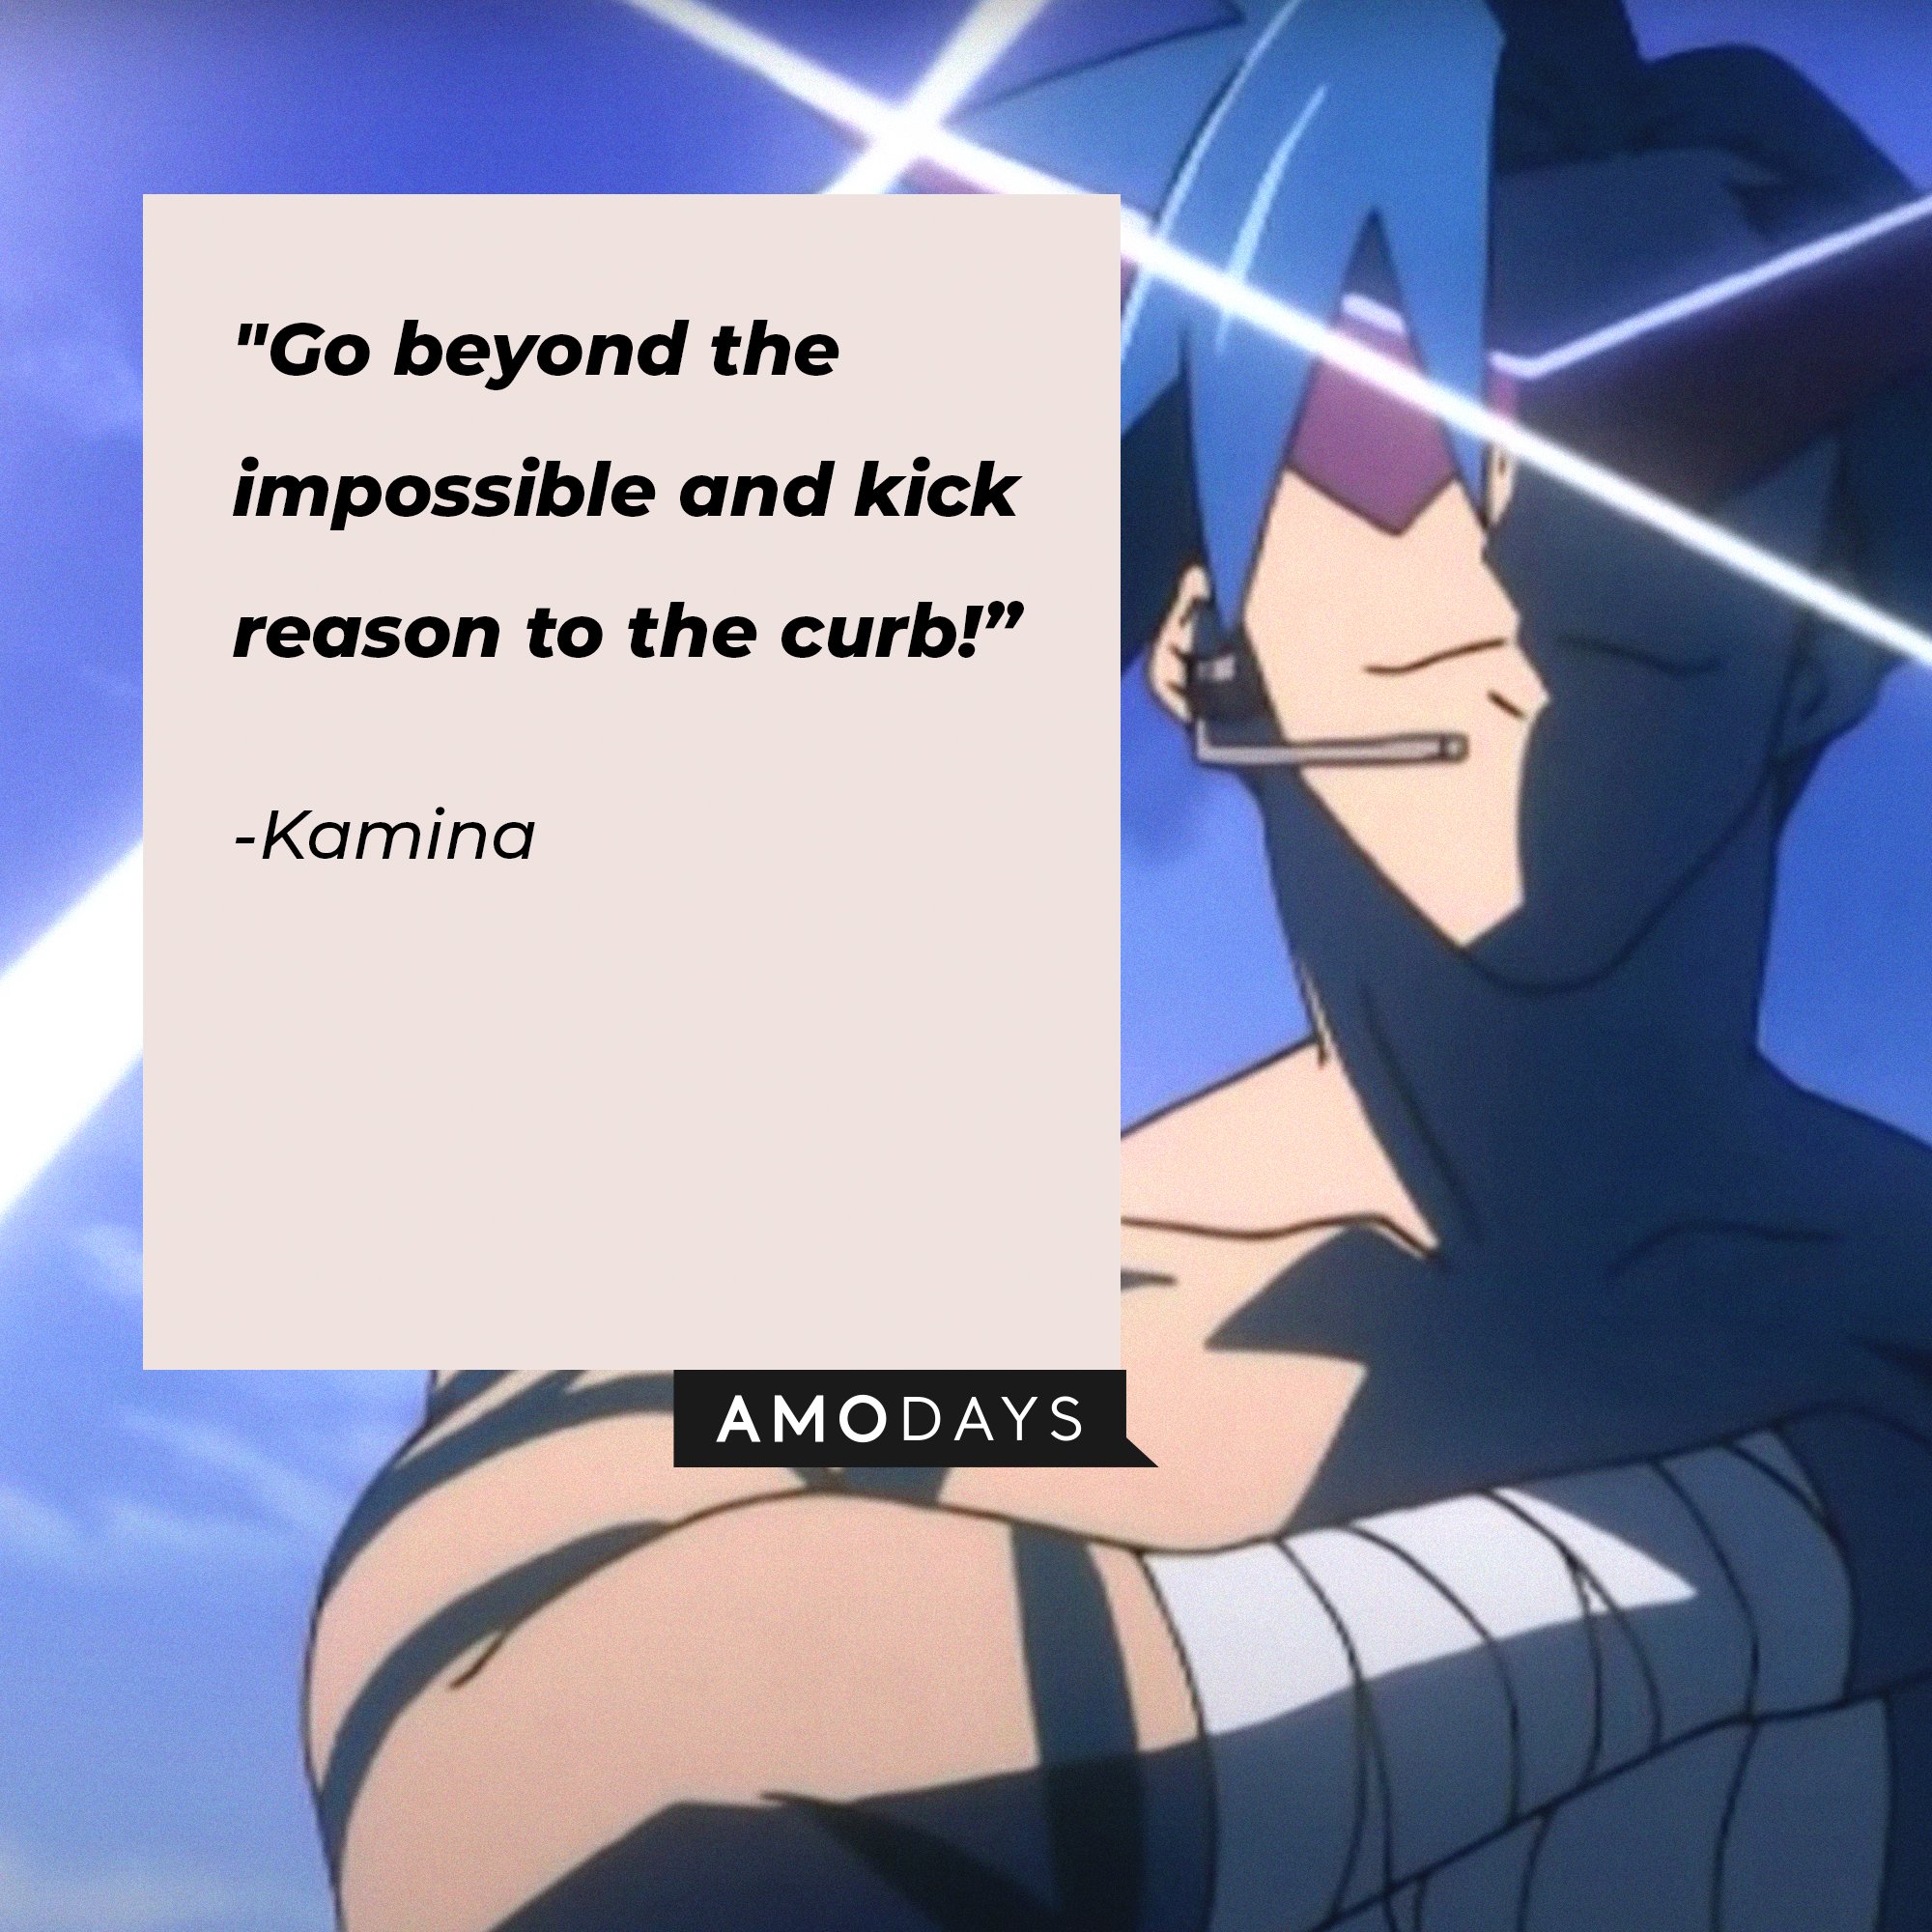 Kamina’s quote: "Go beyond the impossible and kick reason to the curb!” | Image: AmoDays    